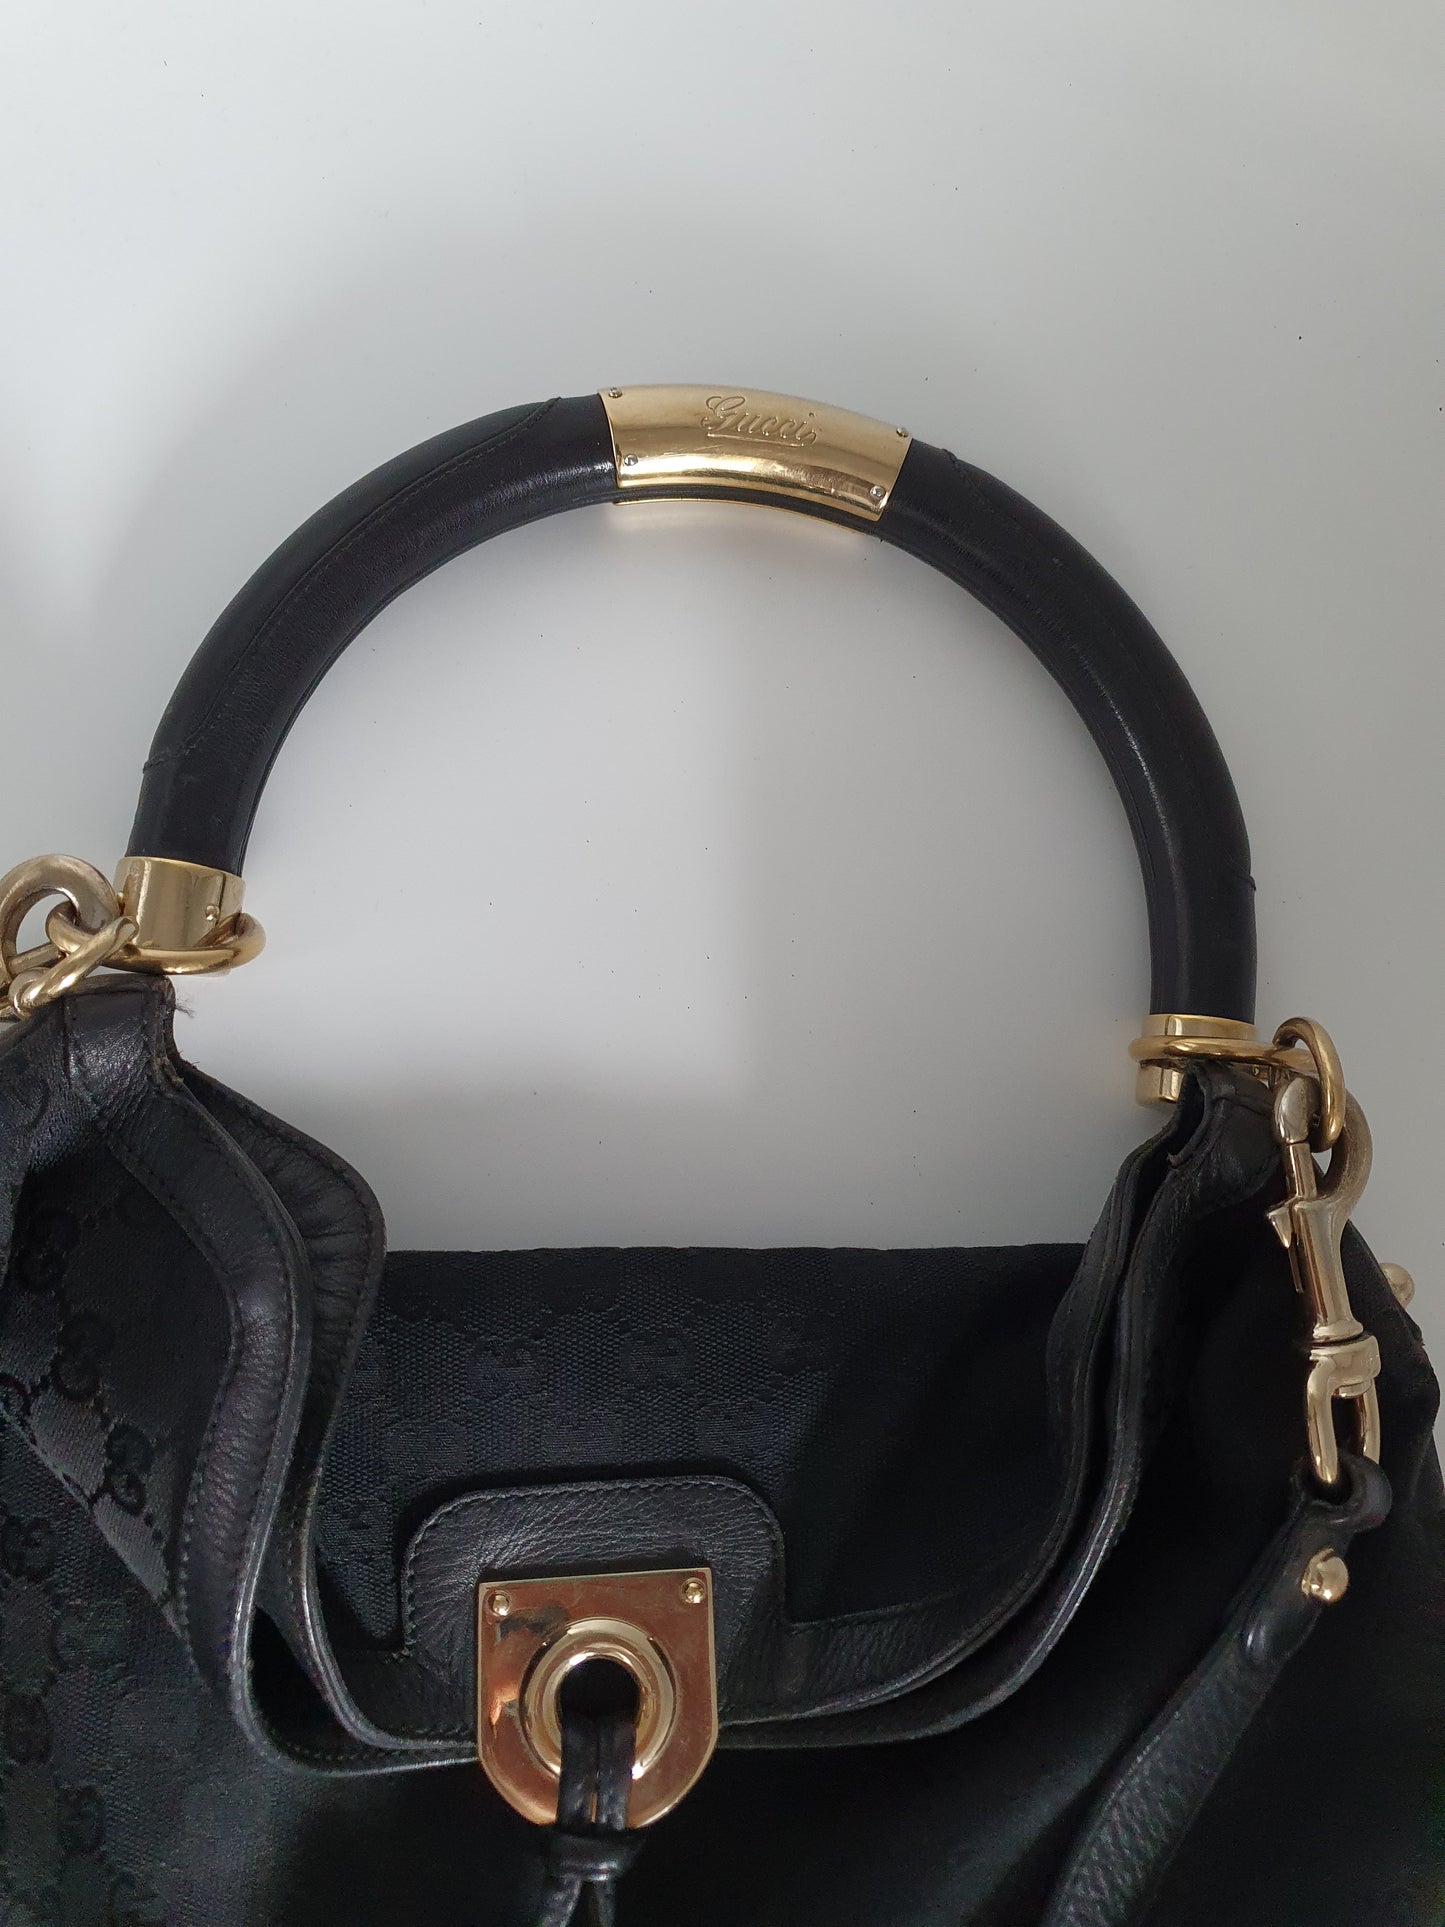 Gucci Indy cloth bag with tassle